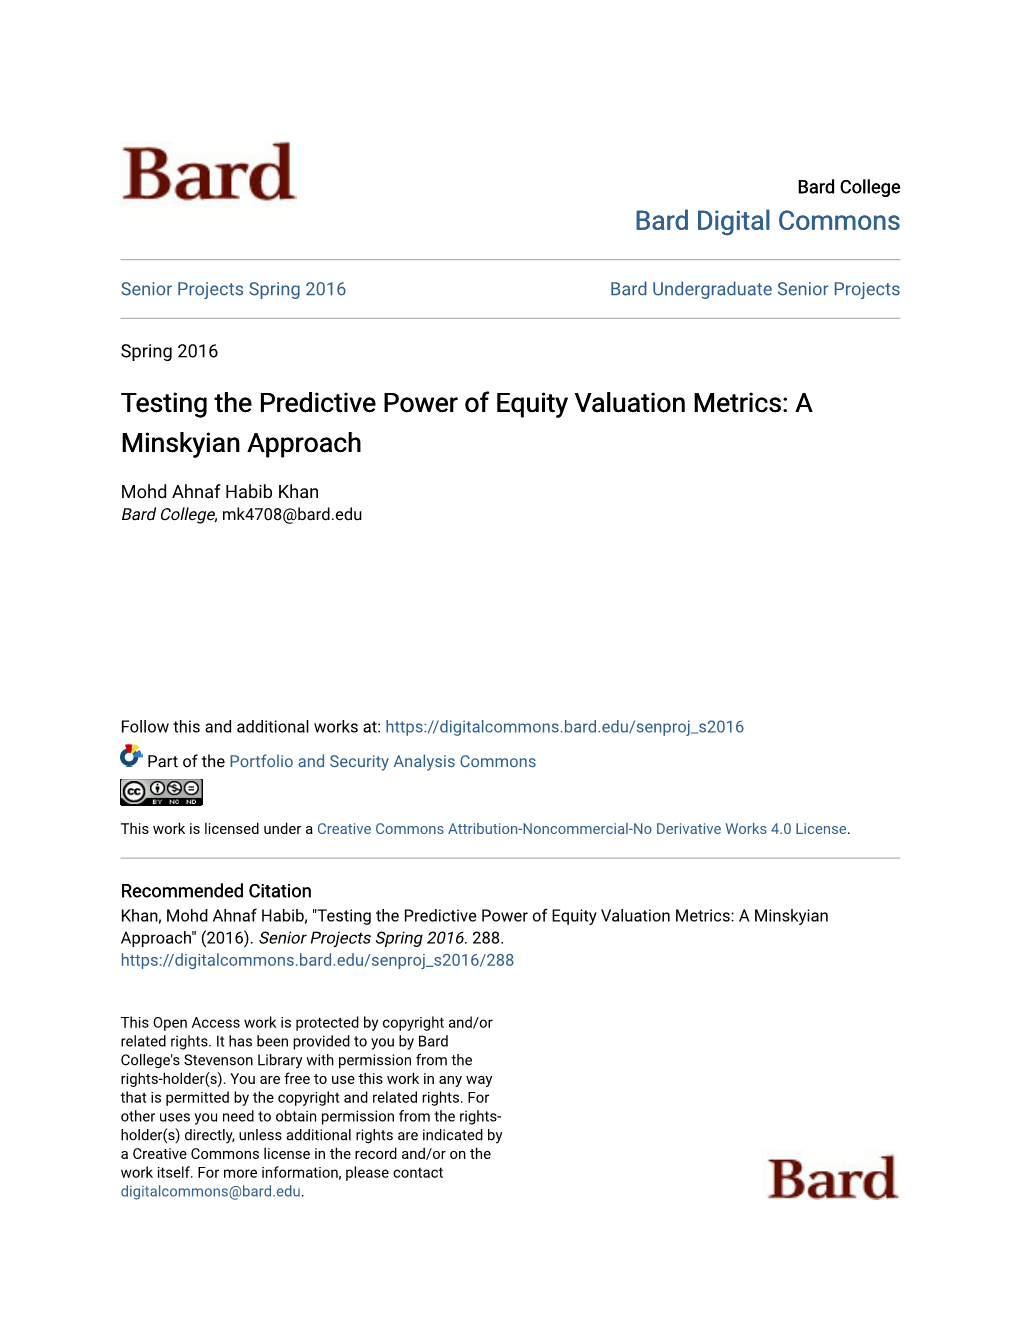 Testing the Predictive Power of Equity Valuation Metrics: a Minskyian Approach